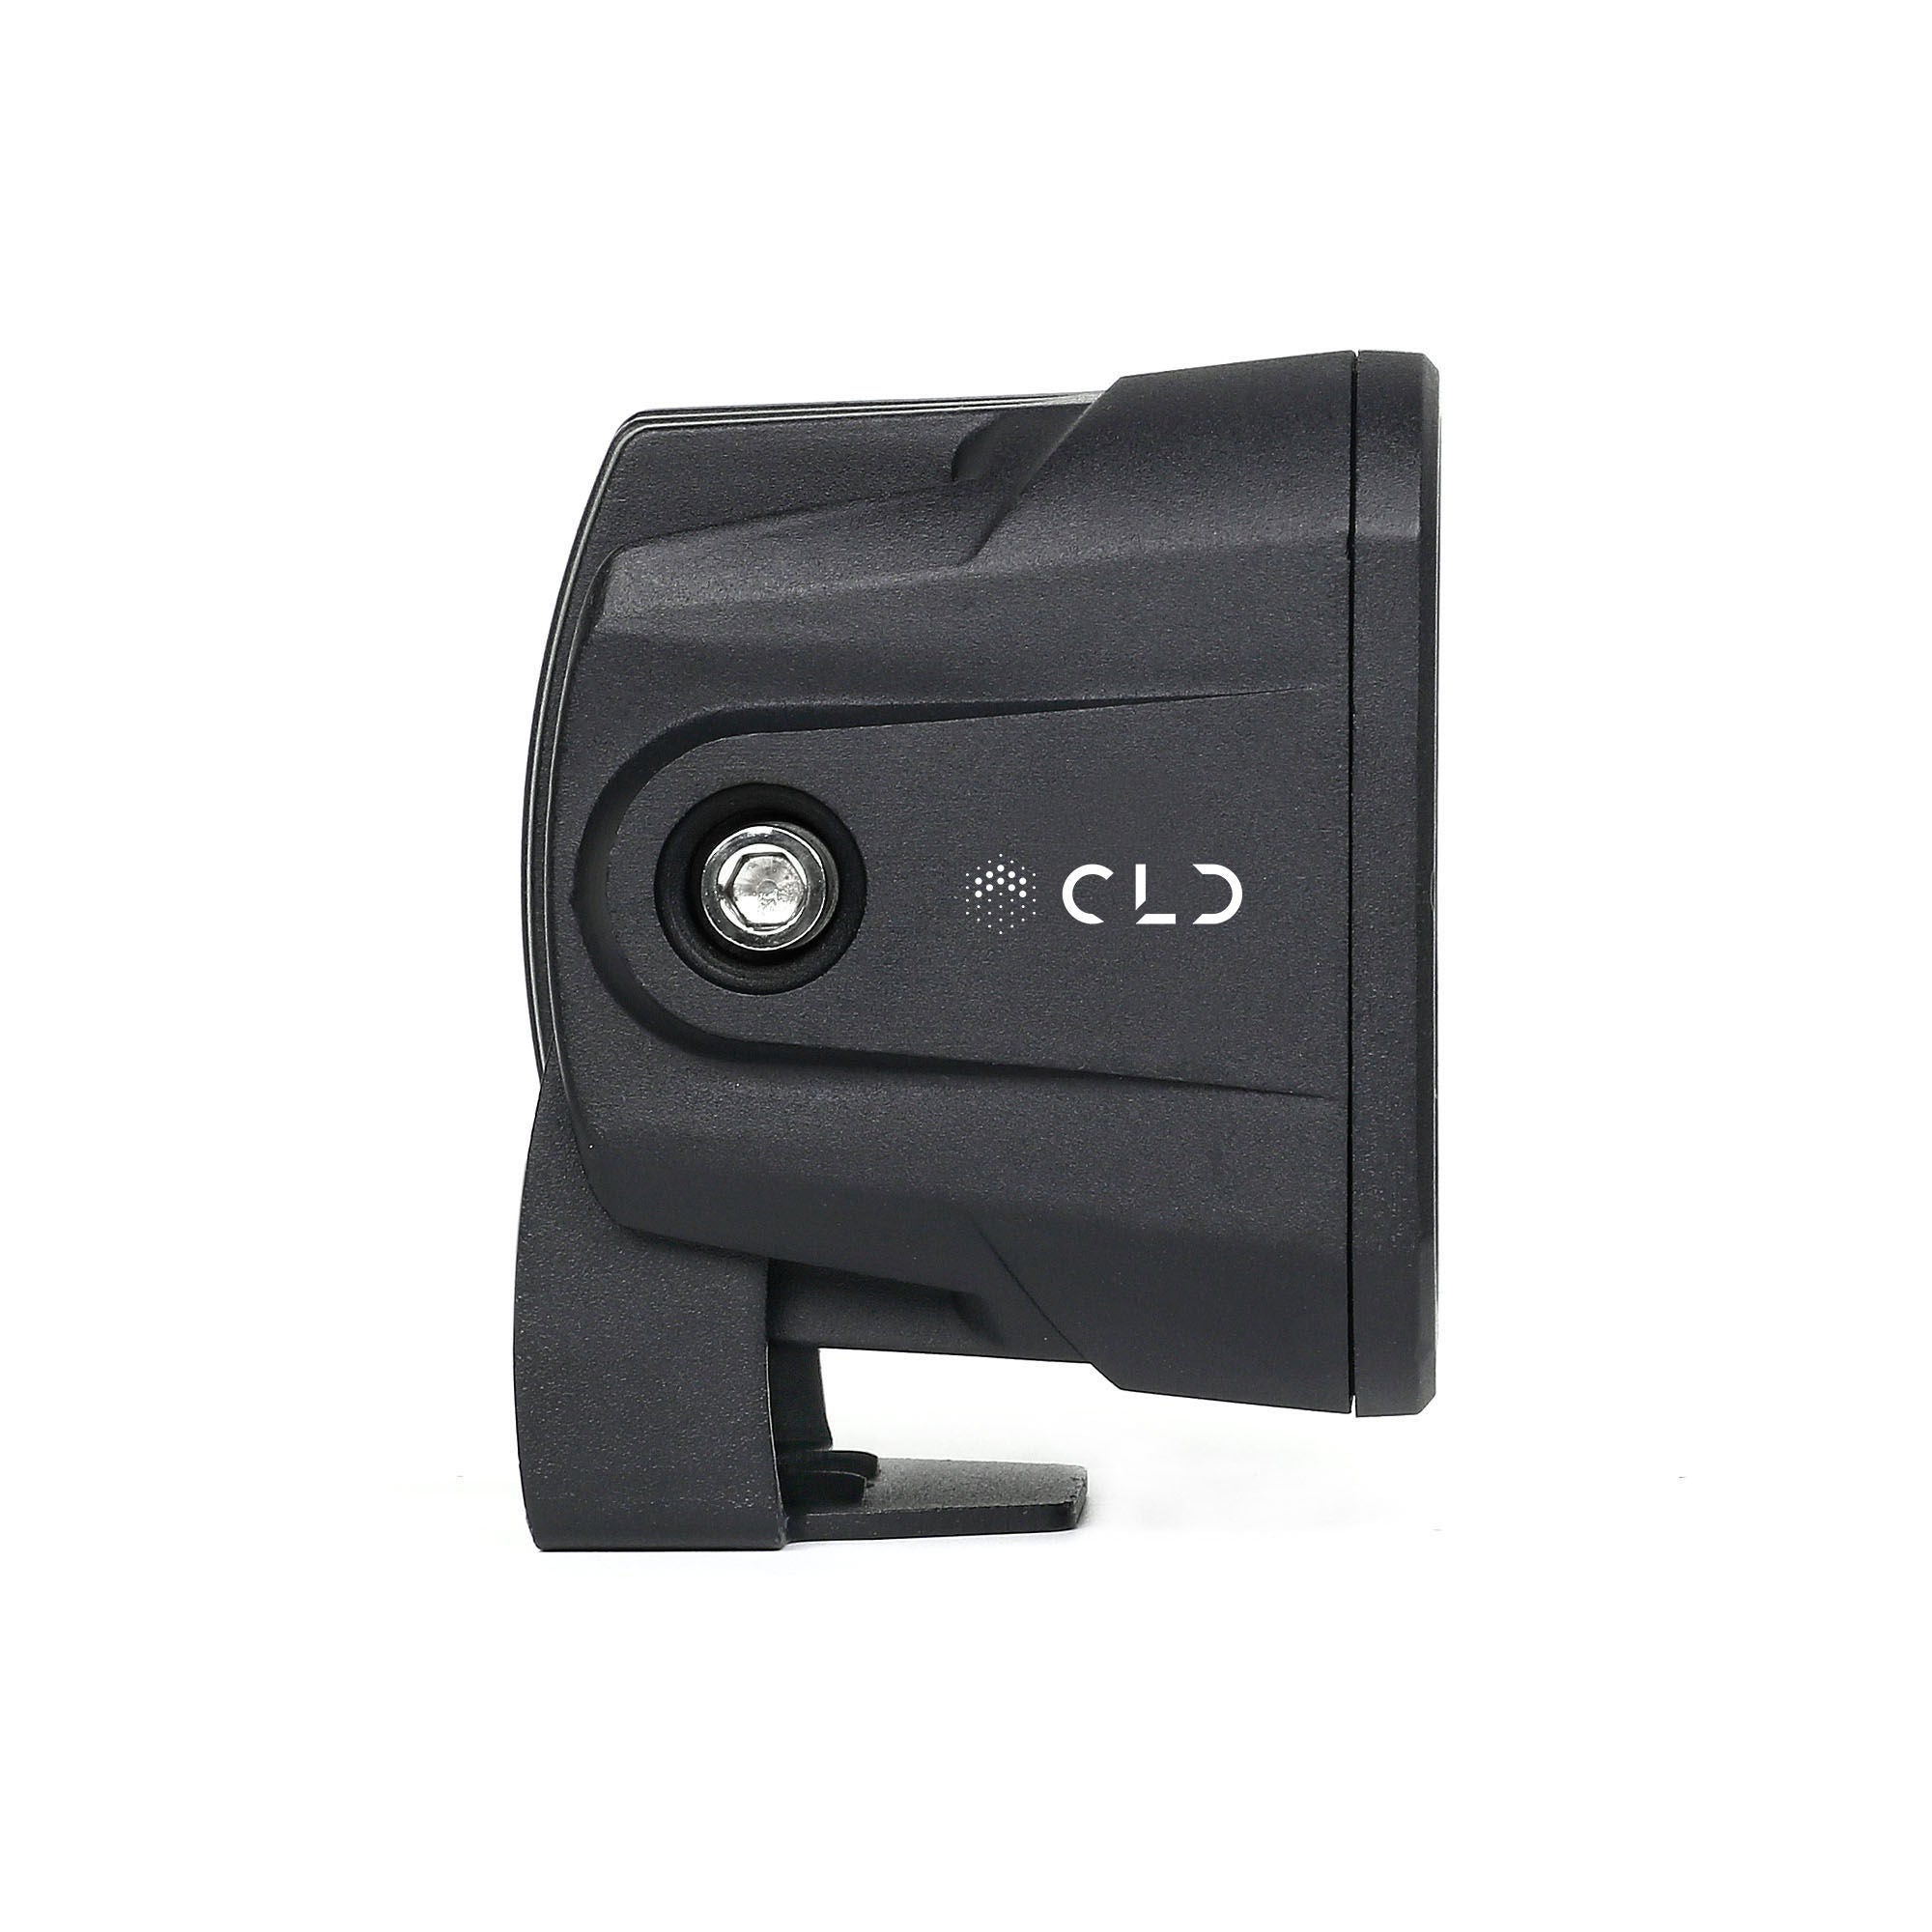 CLD CLDPCFGY - 3" Street Legal LED Pod Light - Auxiliary Square Fog Light w/Yellow Lens (620 Lumens)